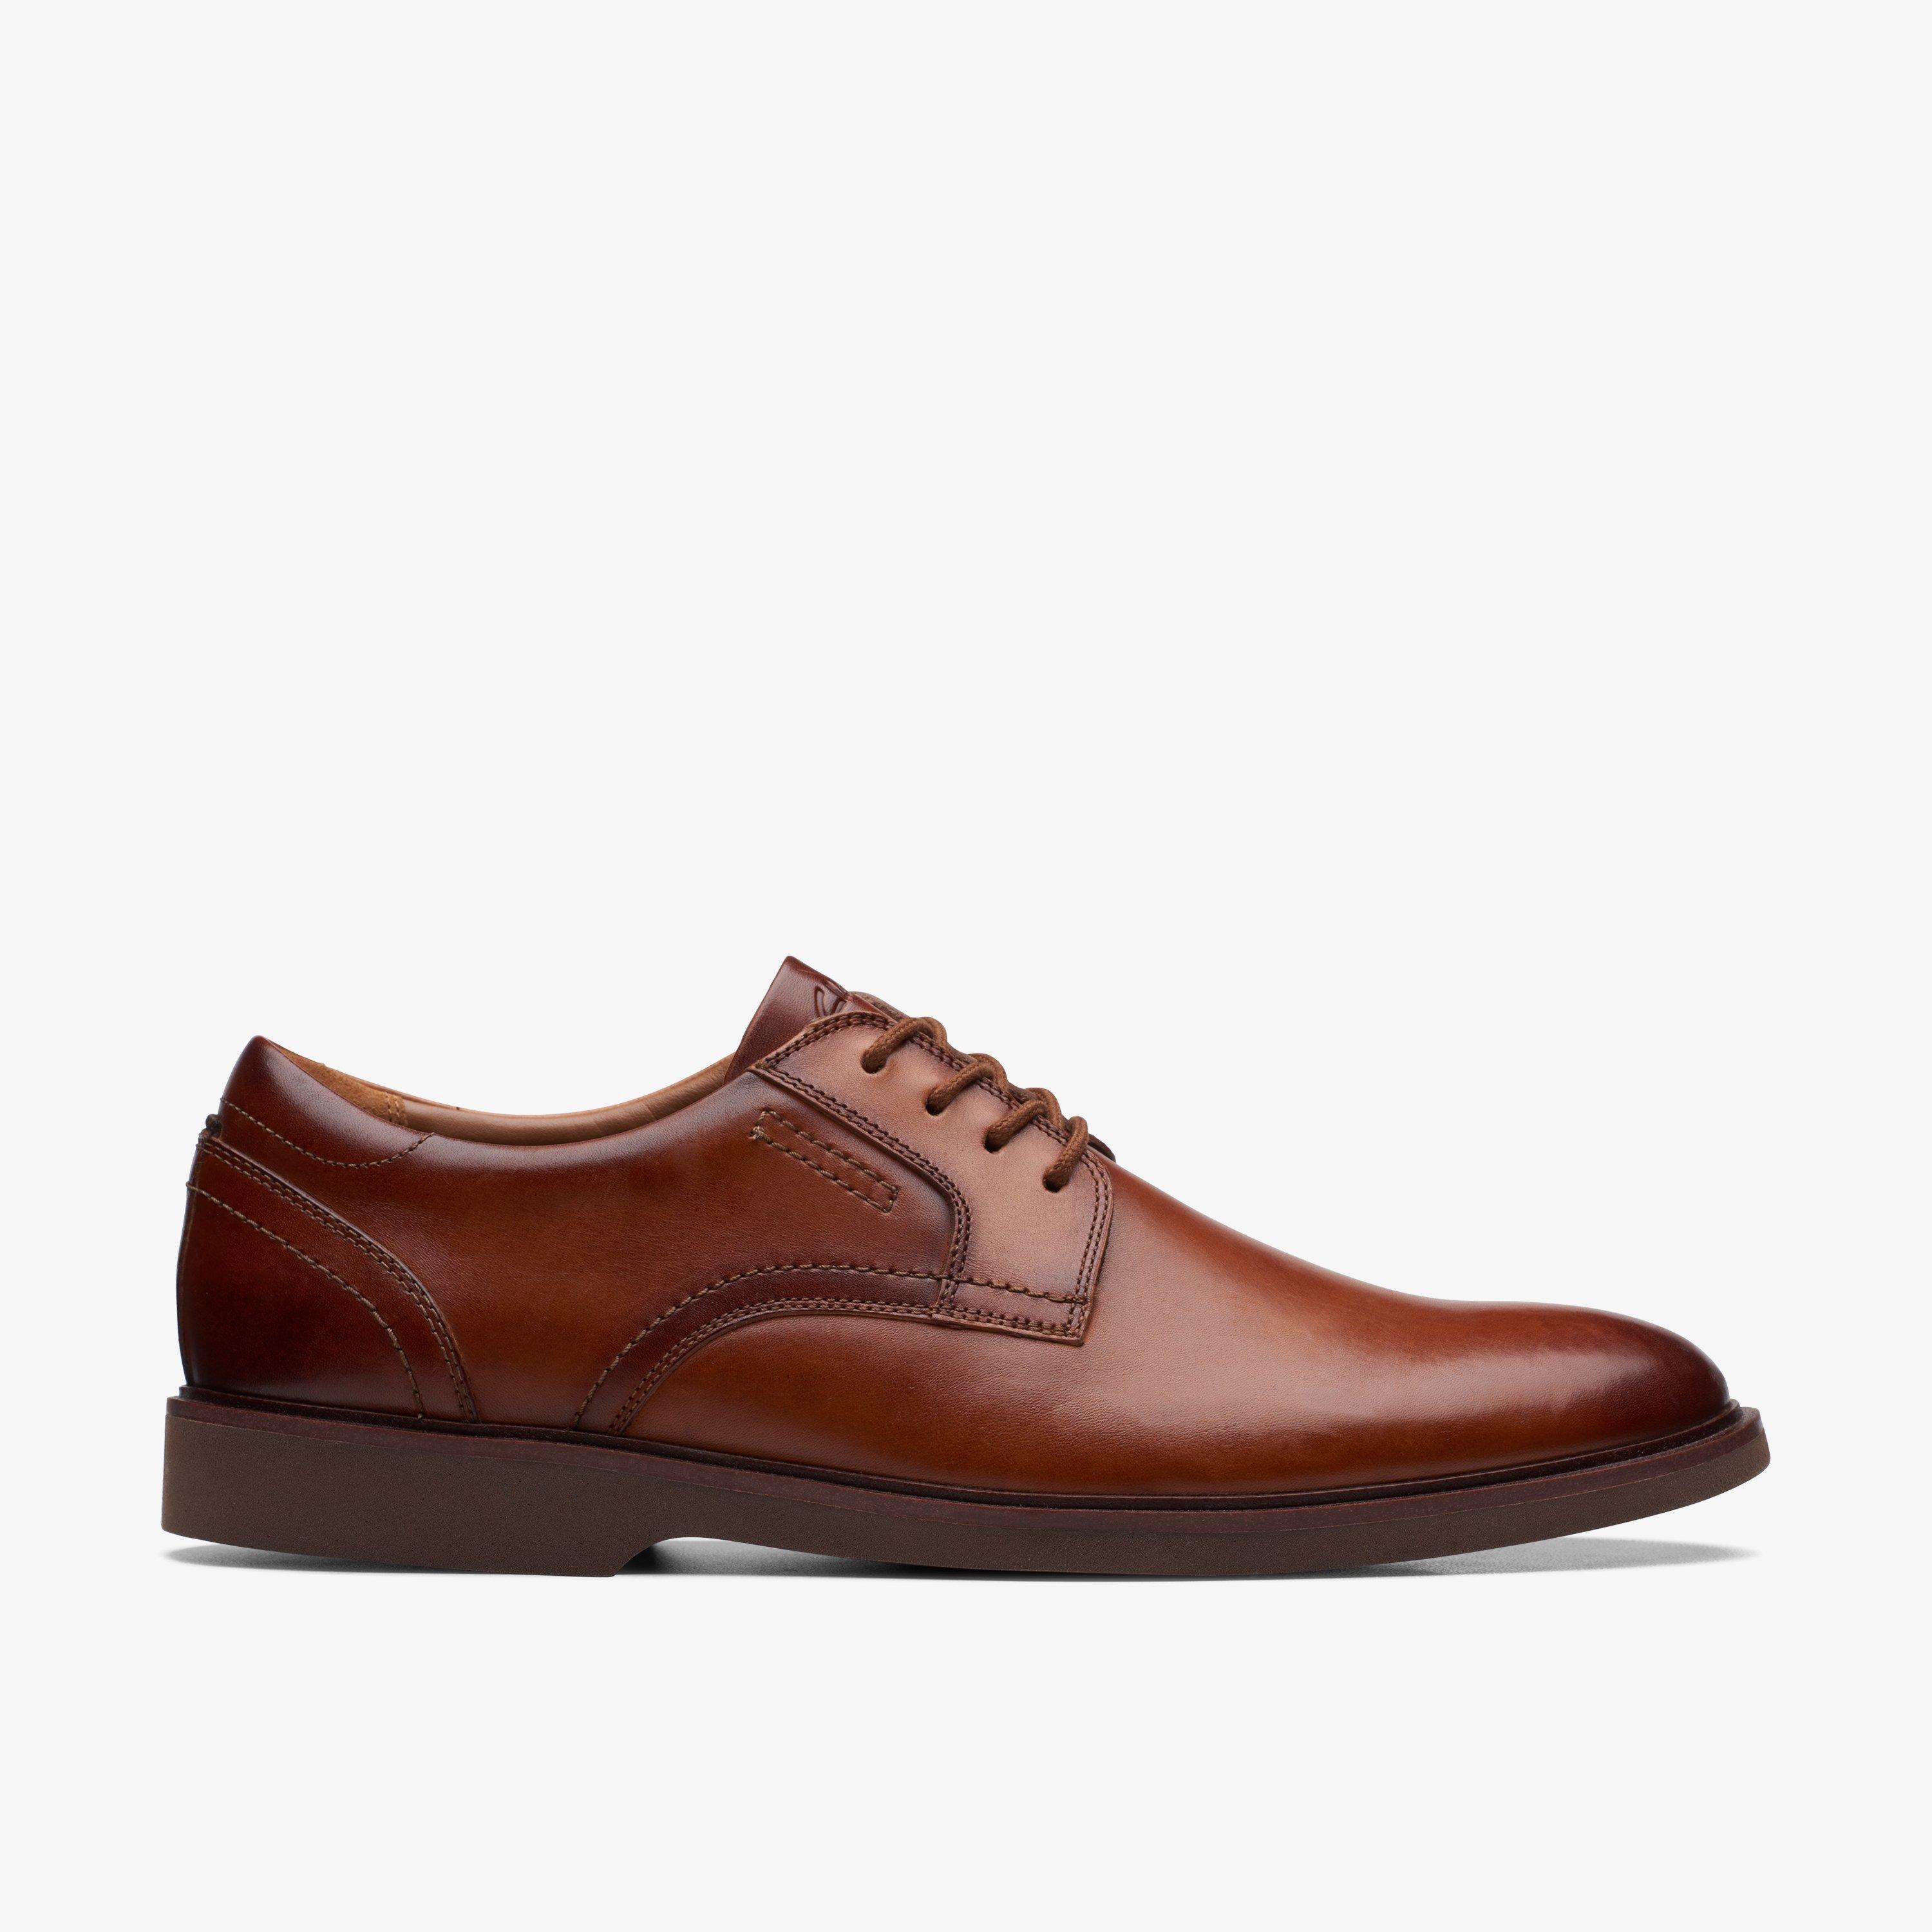 Net - Leather Shoes for Men